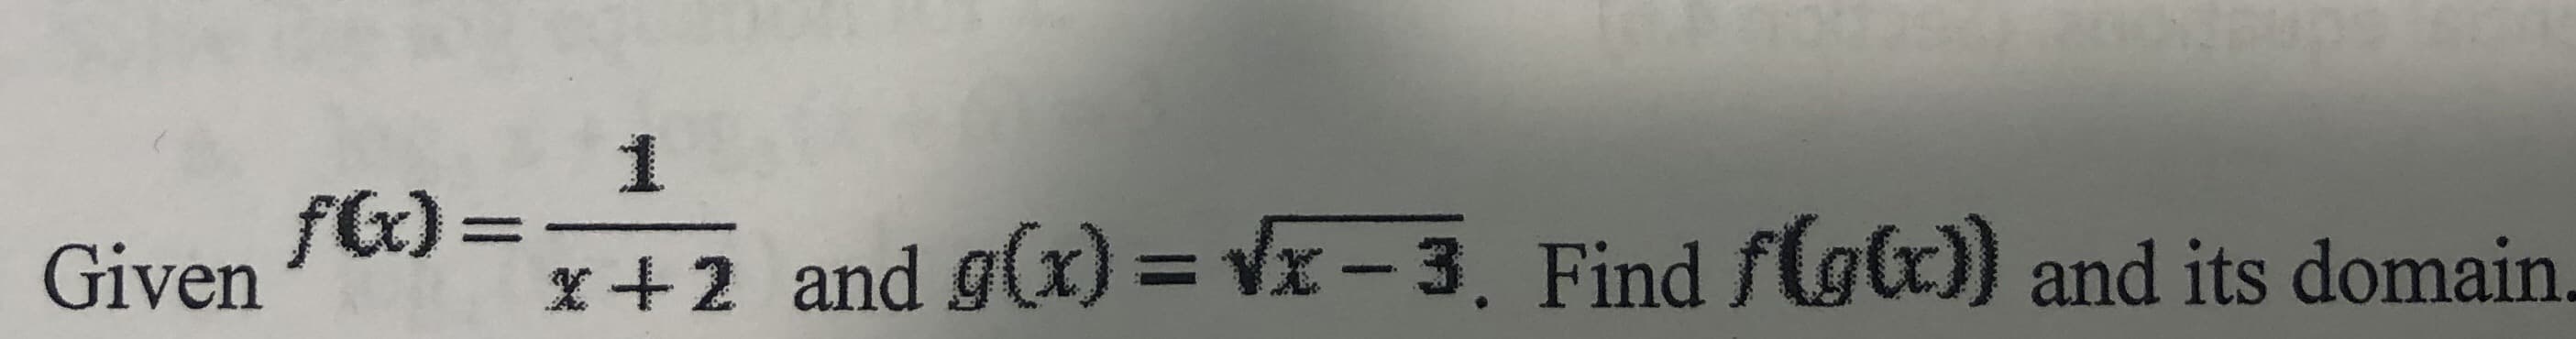 fG) =
x +2 and g(x) = Vx -3. Find flgc)) and its domain.
Given
%3D
